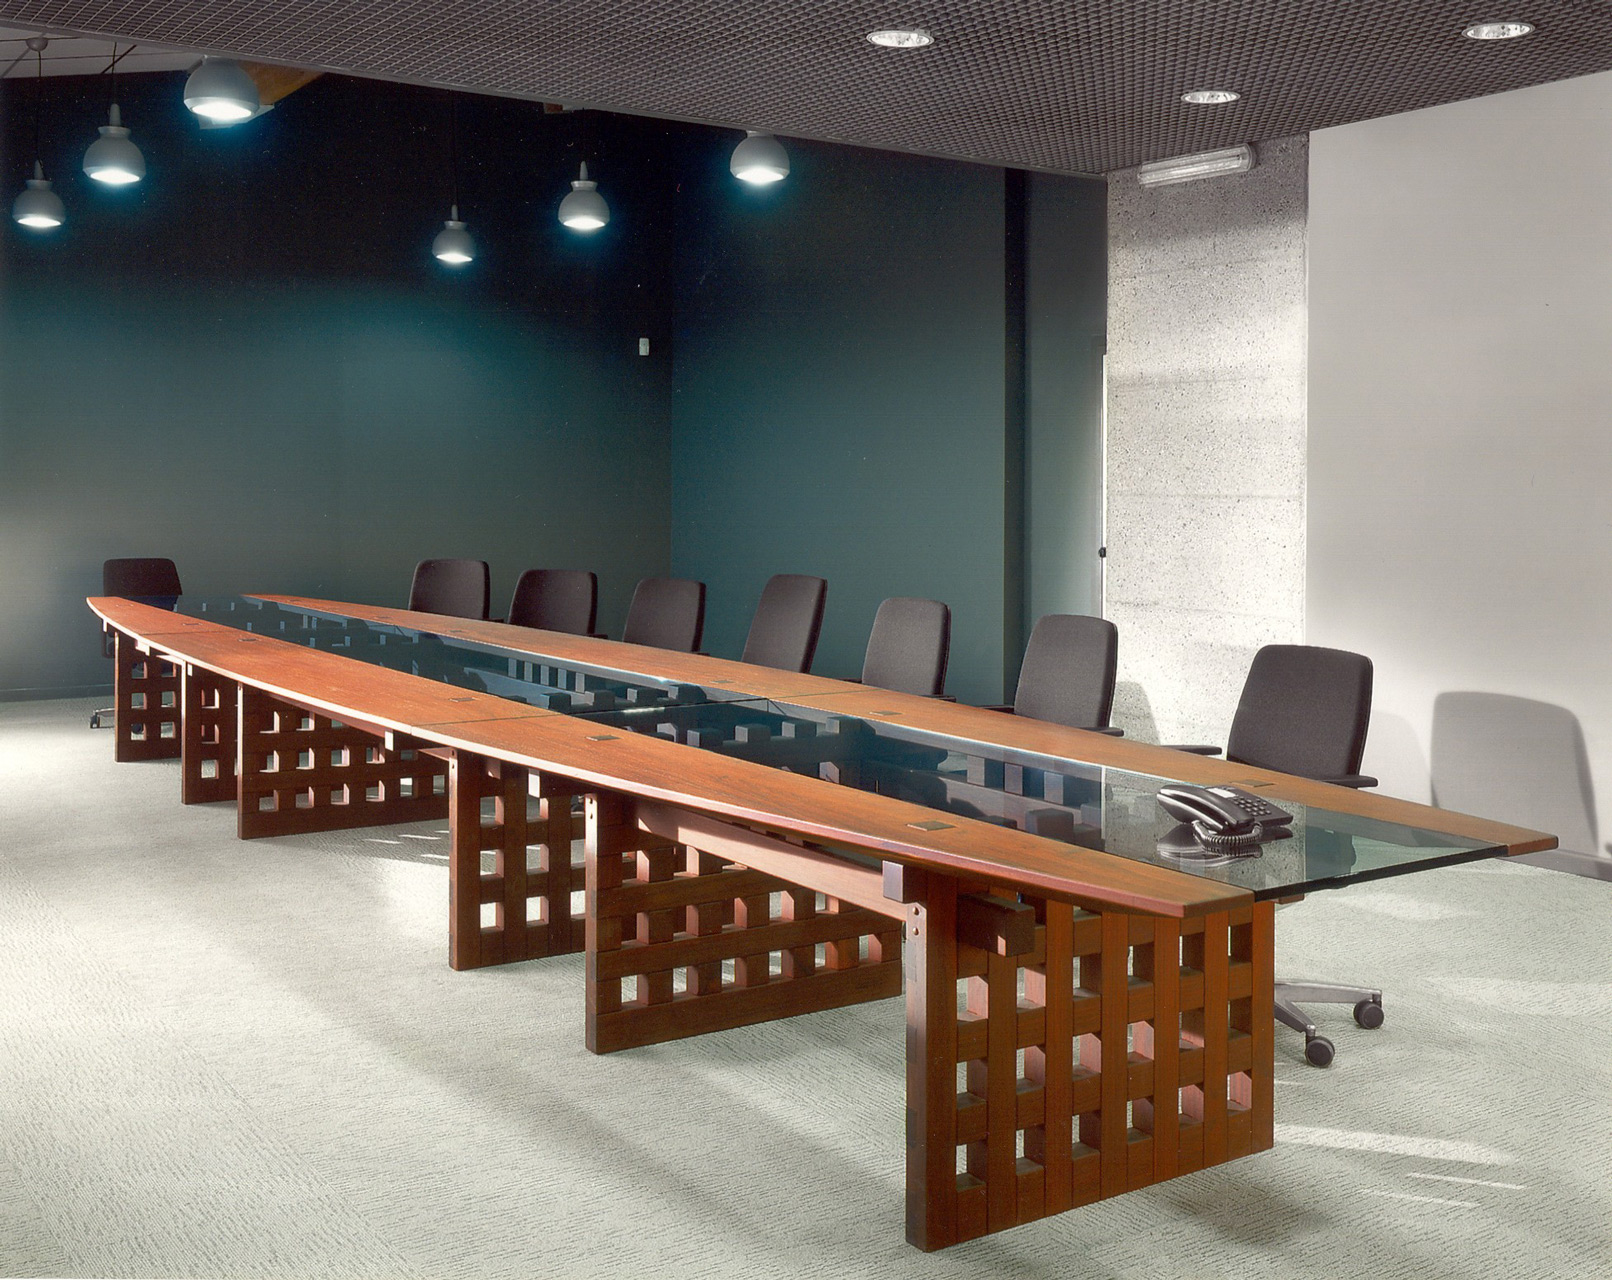 Conference table in paduak wood. Design by Nester Piotrowski.